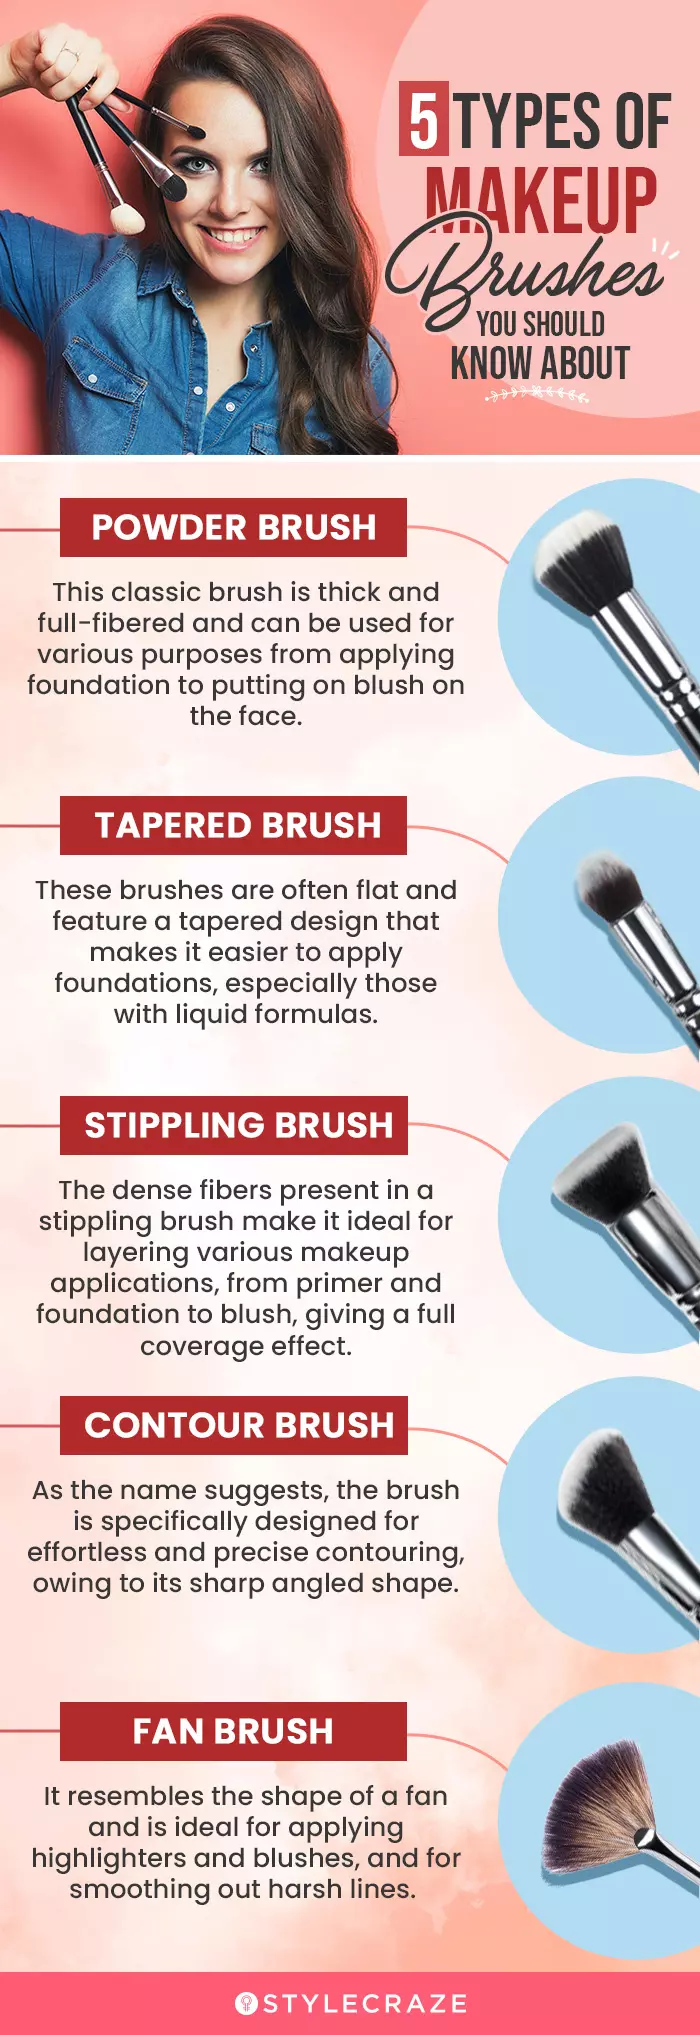 5 Types Of Makeup Brushes You Should Know About (infographic)